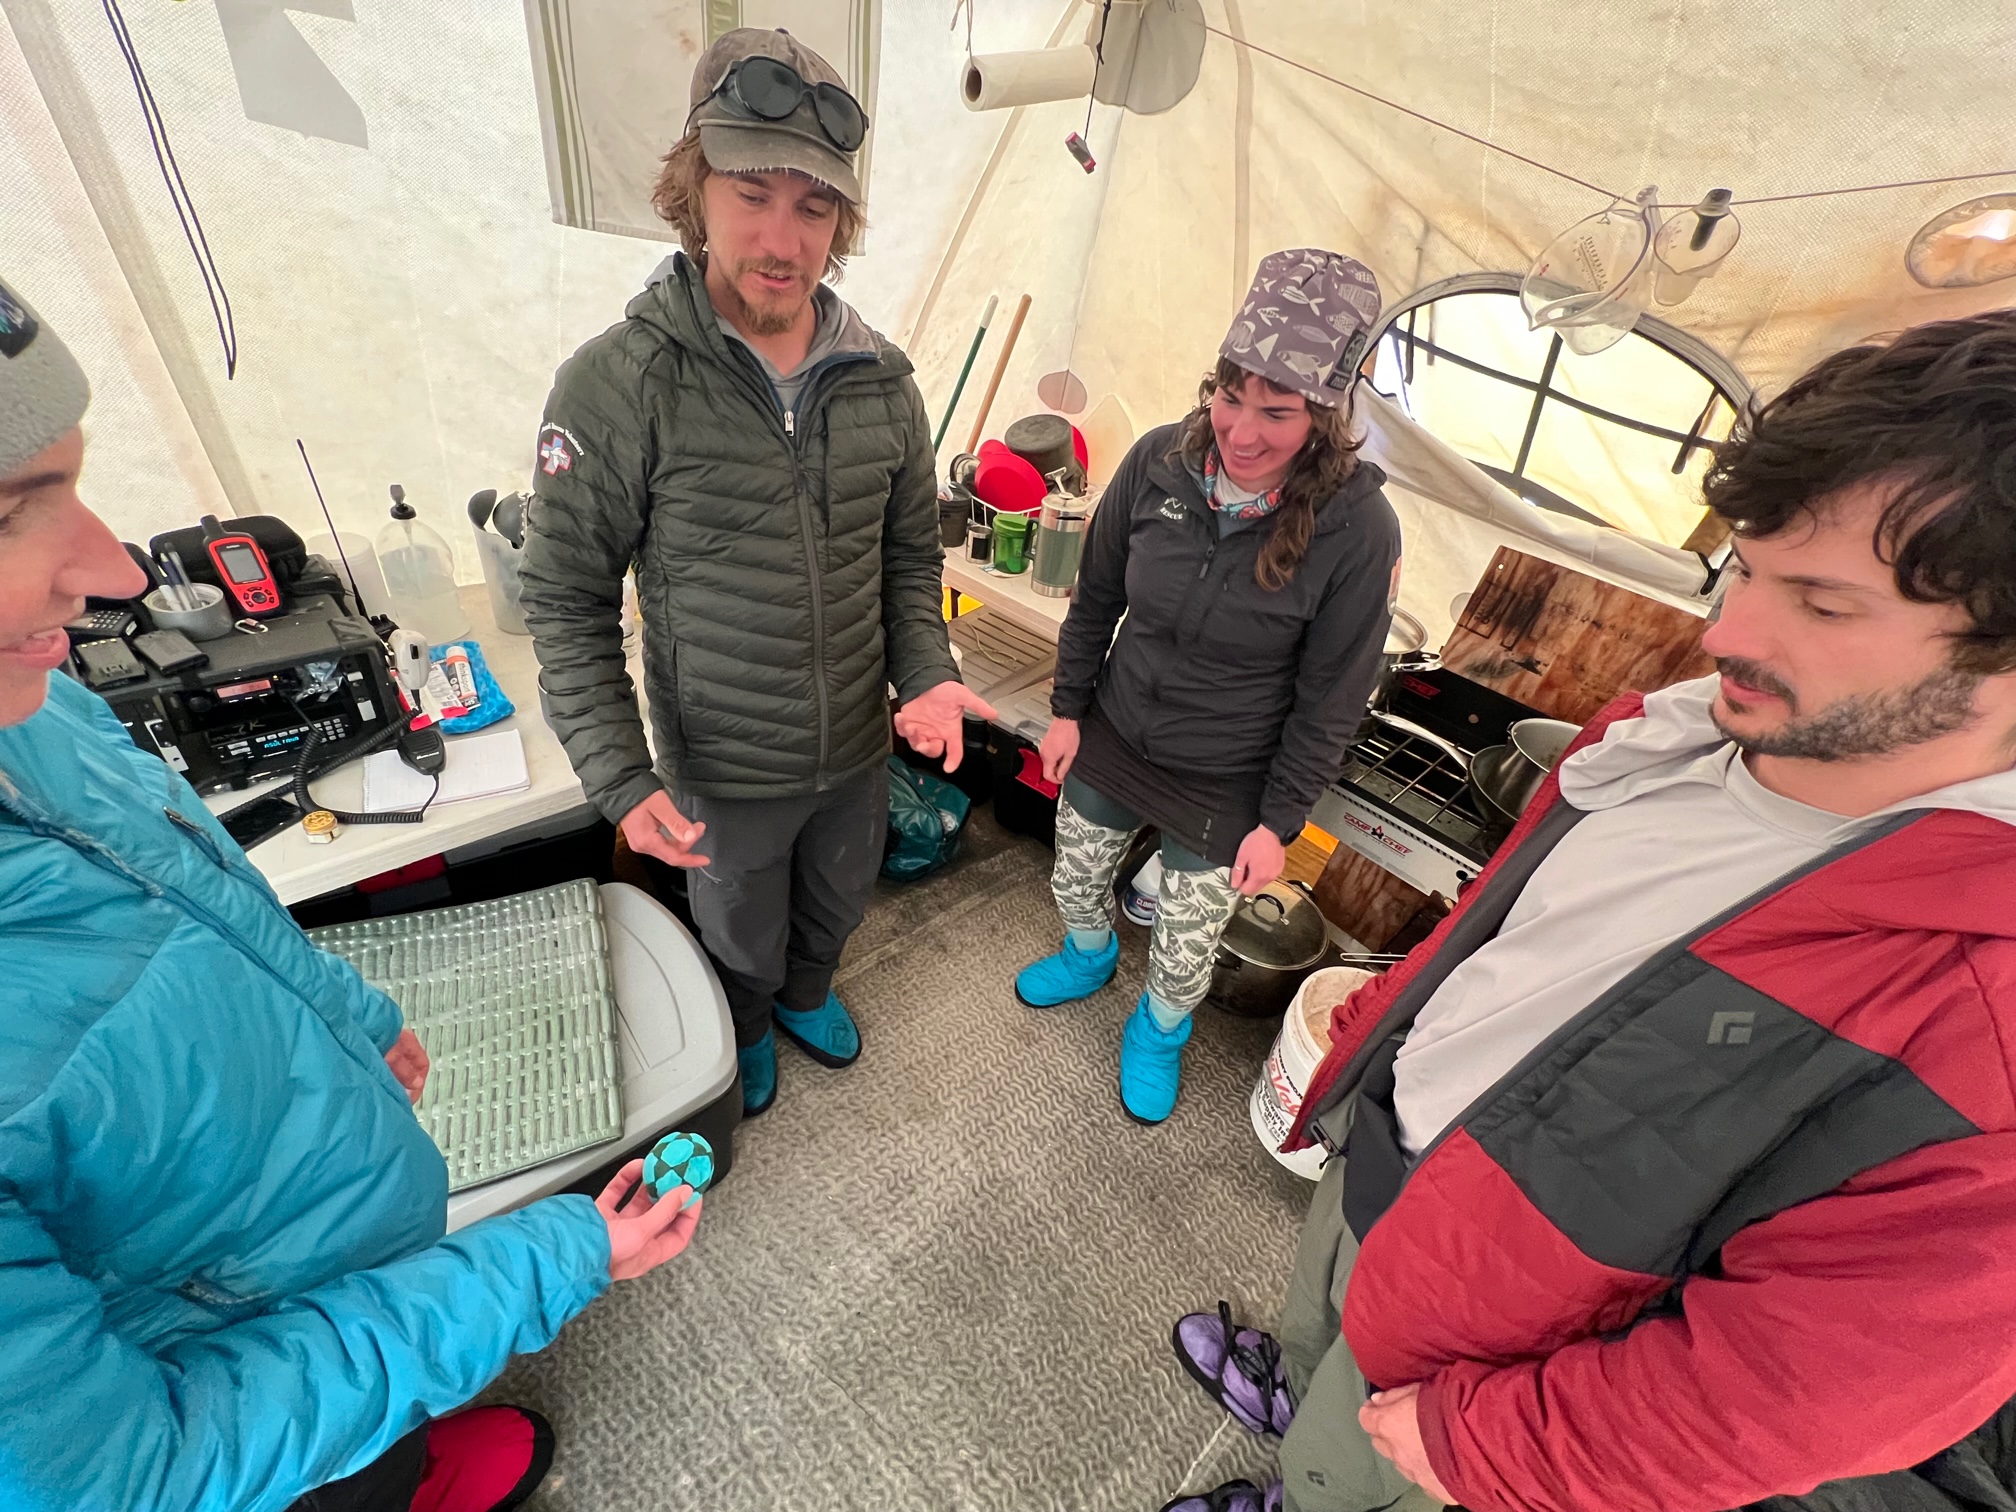 Four climbers standing inside a tent stare down at a hackysack